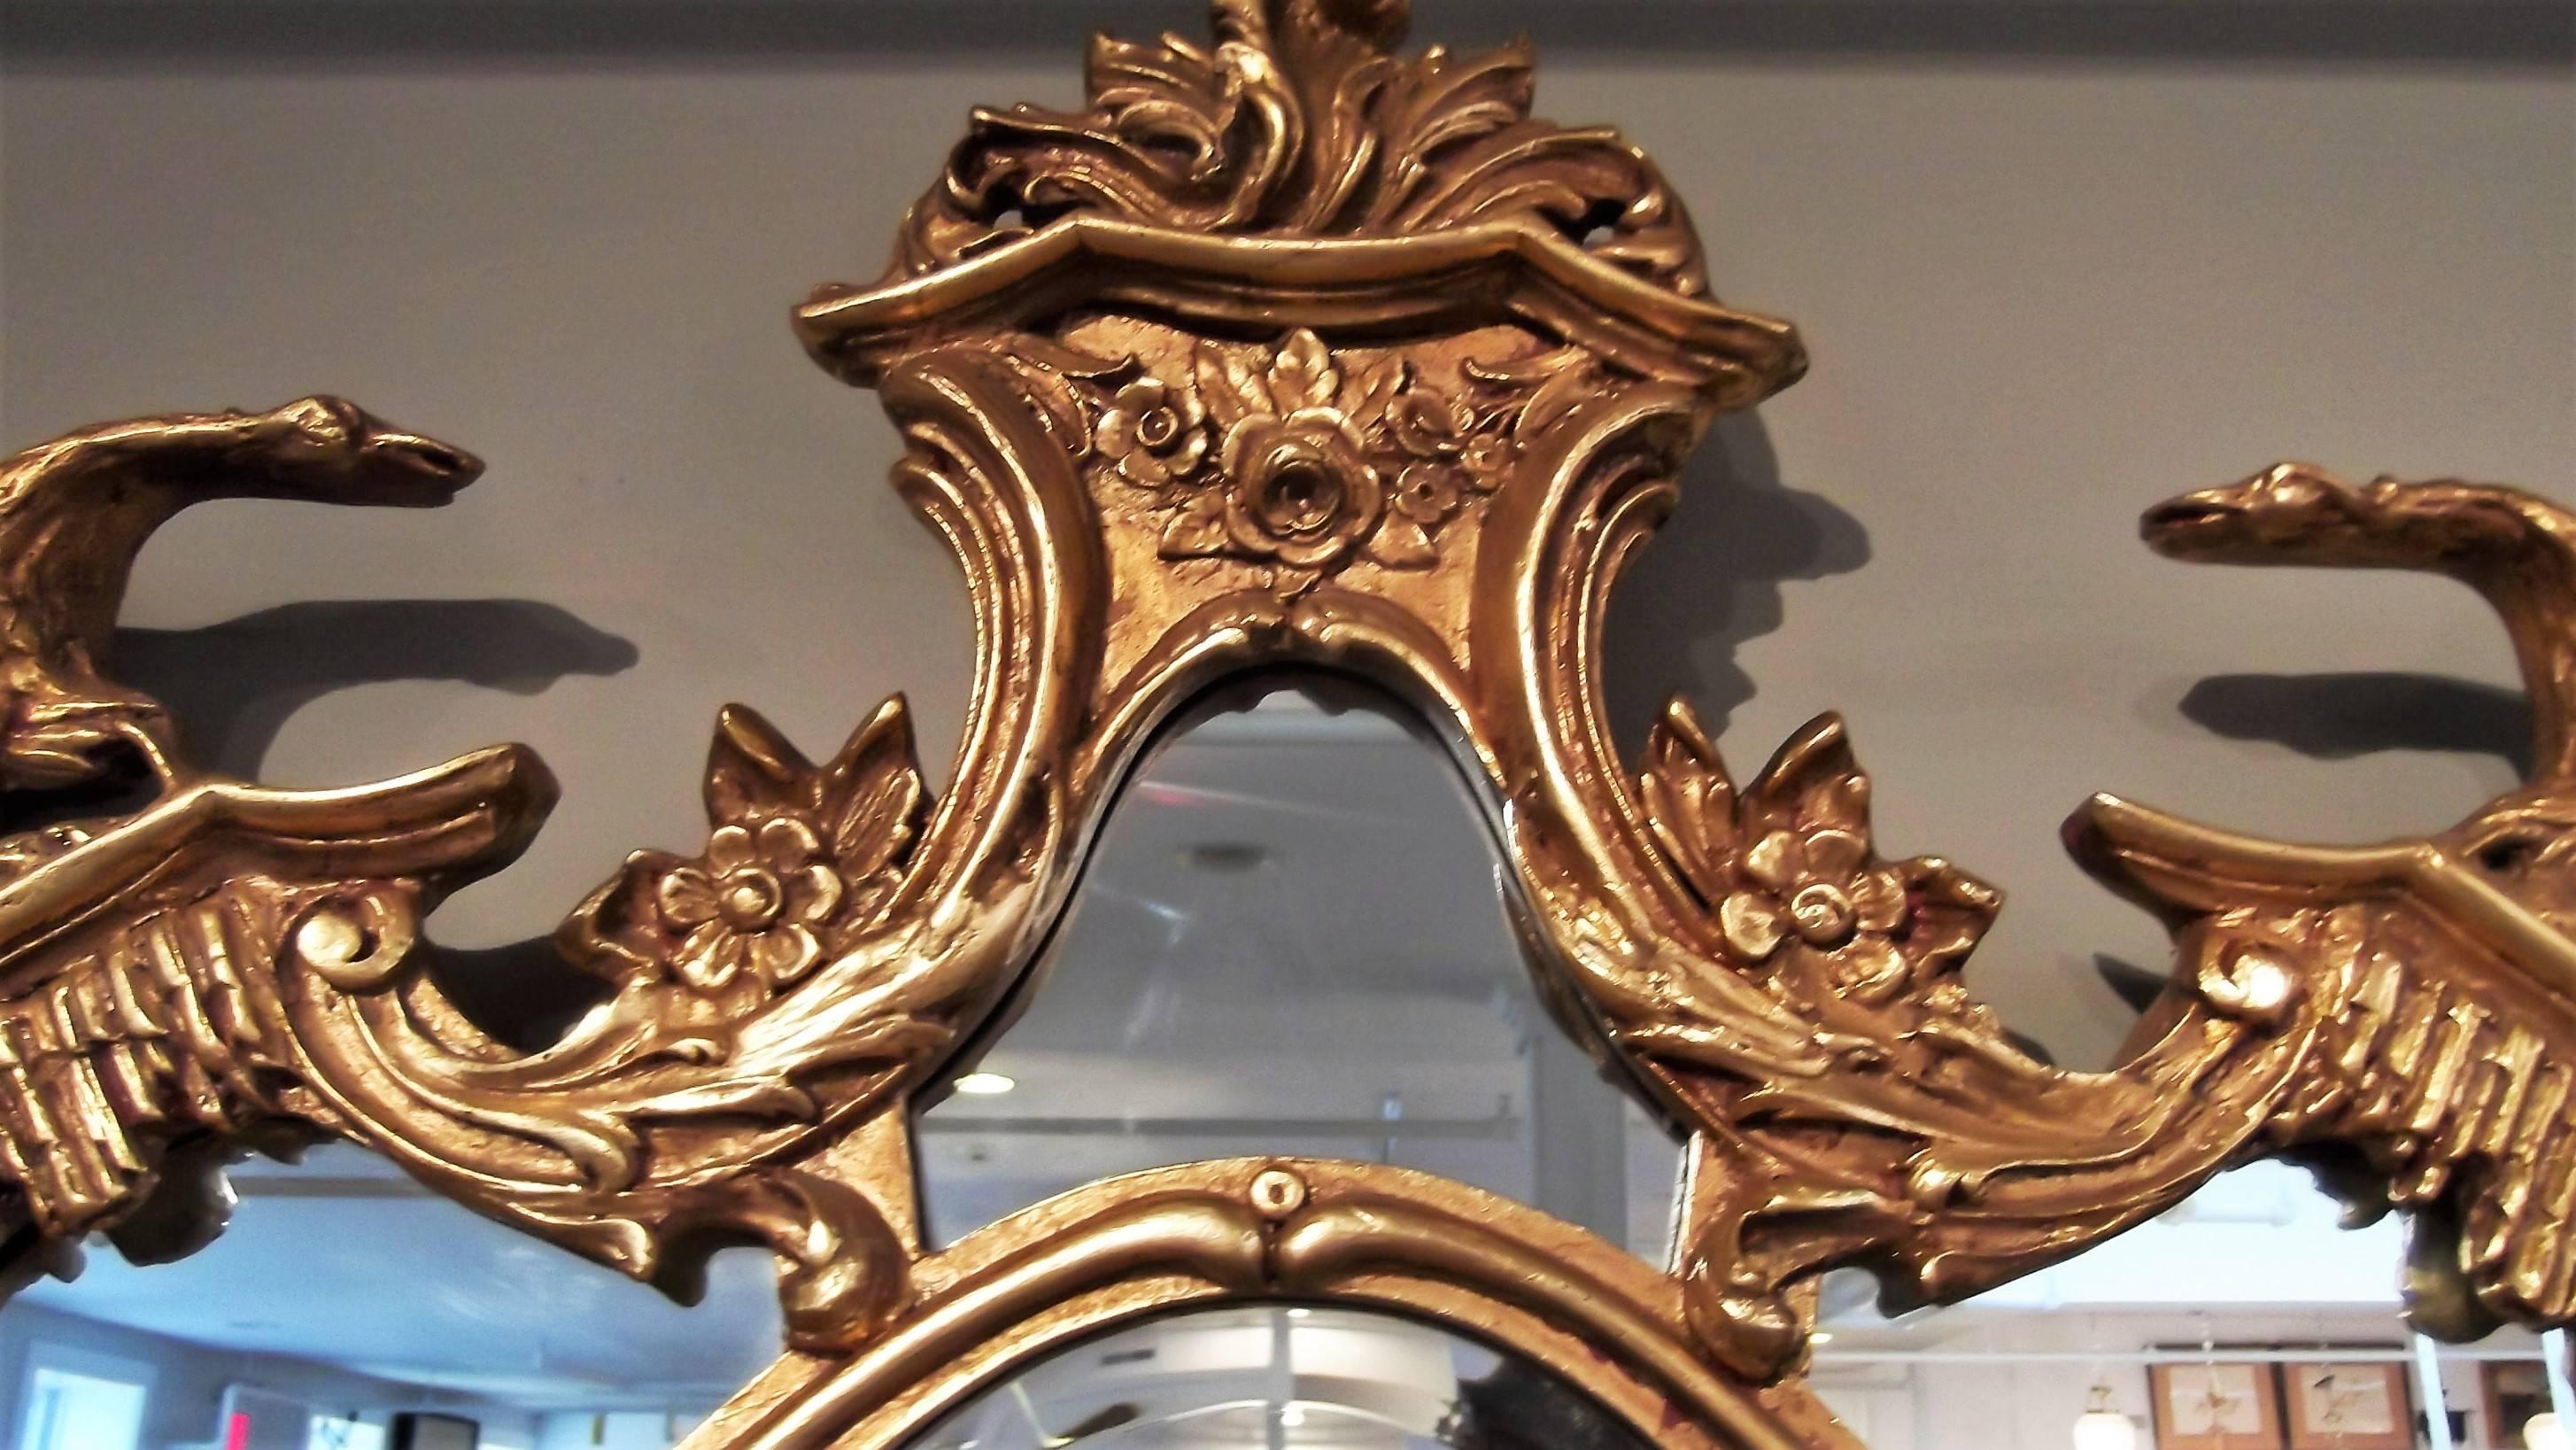 Elaborate framed giltwood mirror made by Friedman Brothers. A center plume top pediment flanked by a pair of swans with Rococo scrolls along the sides and bottom. Impressive size. The main portion of the mirror is beveled.